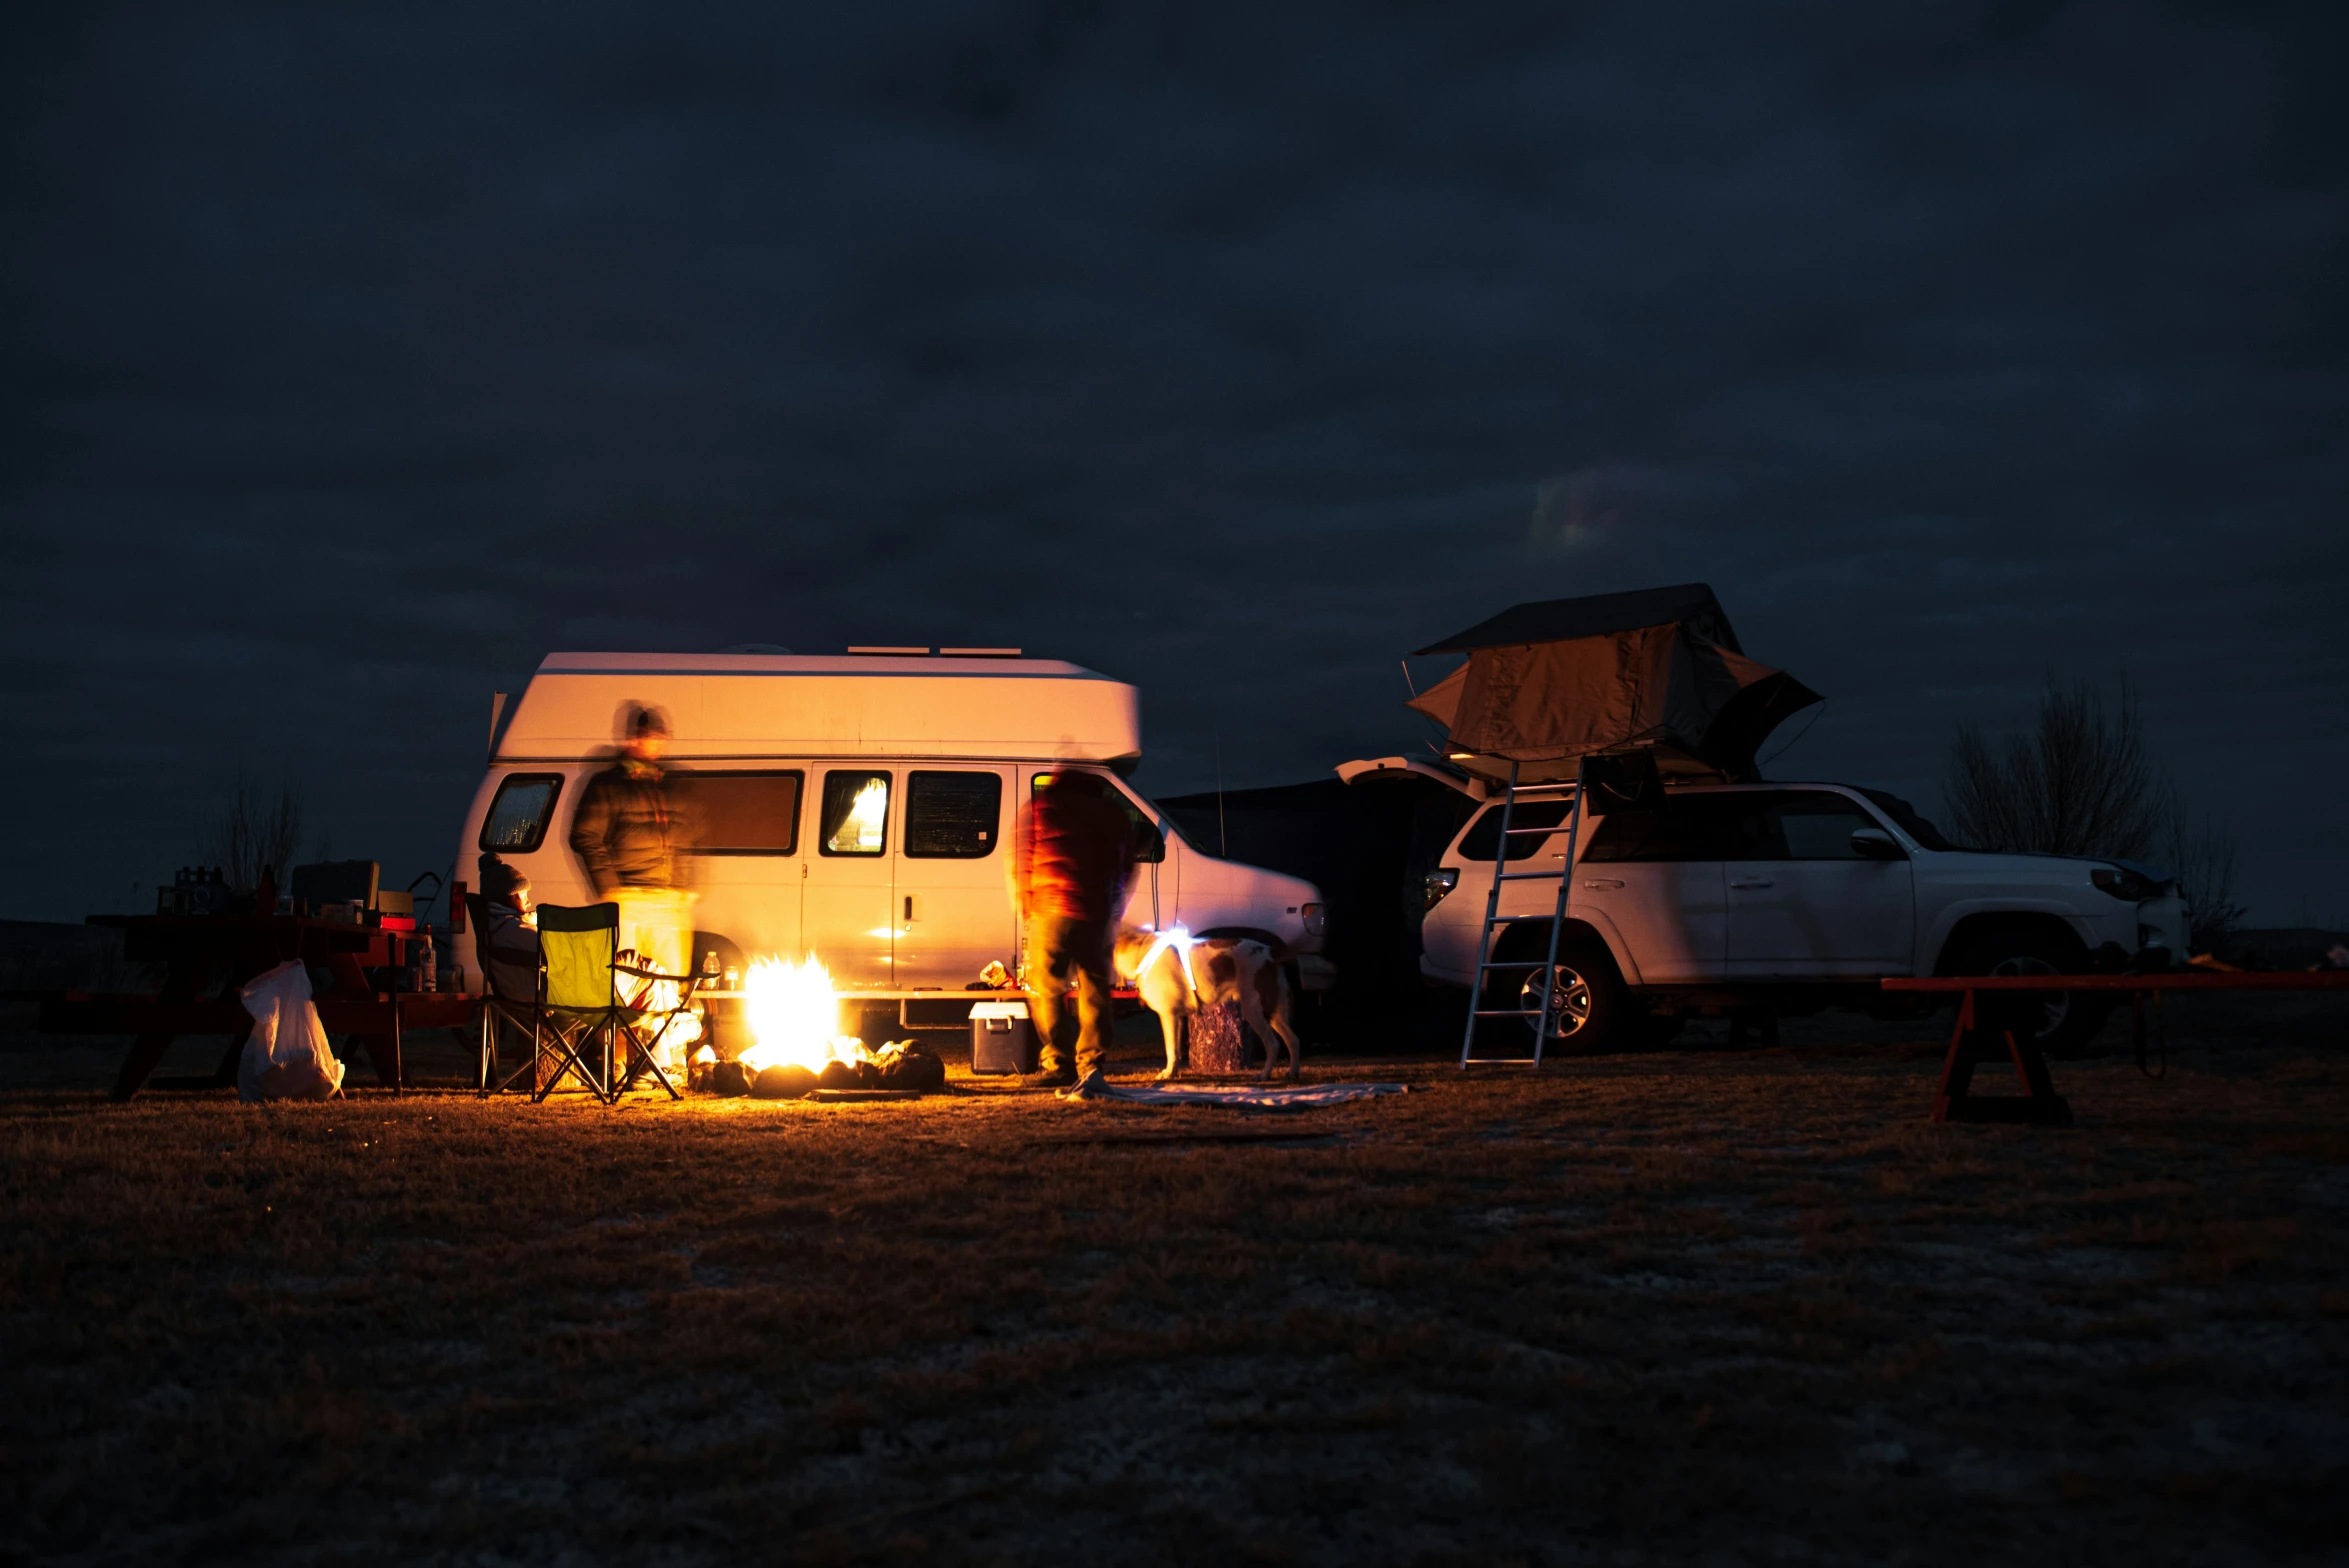 a van with its lights on and camper parked in the background